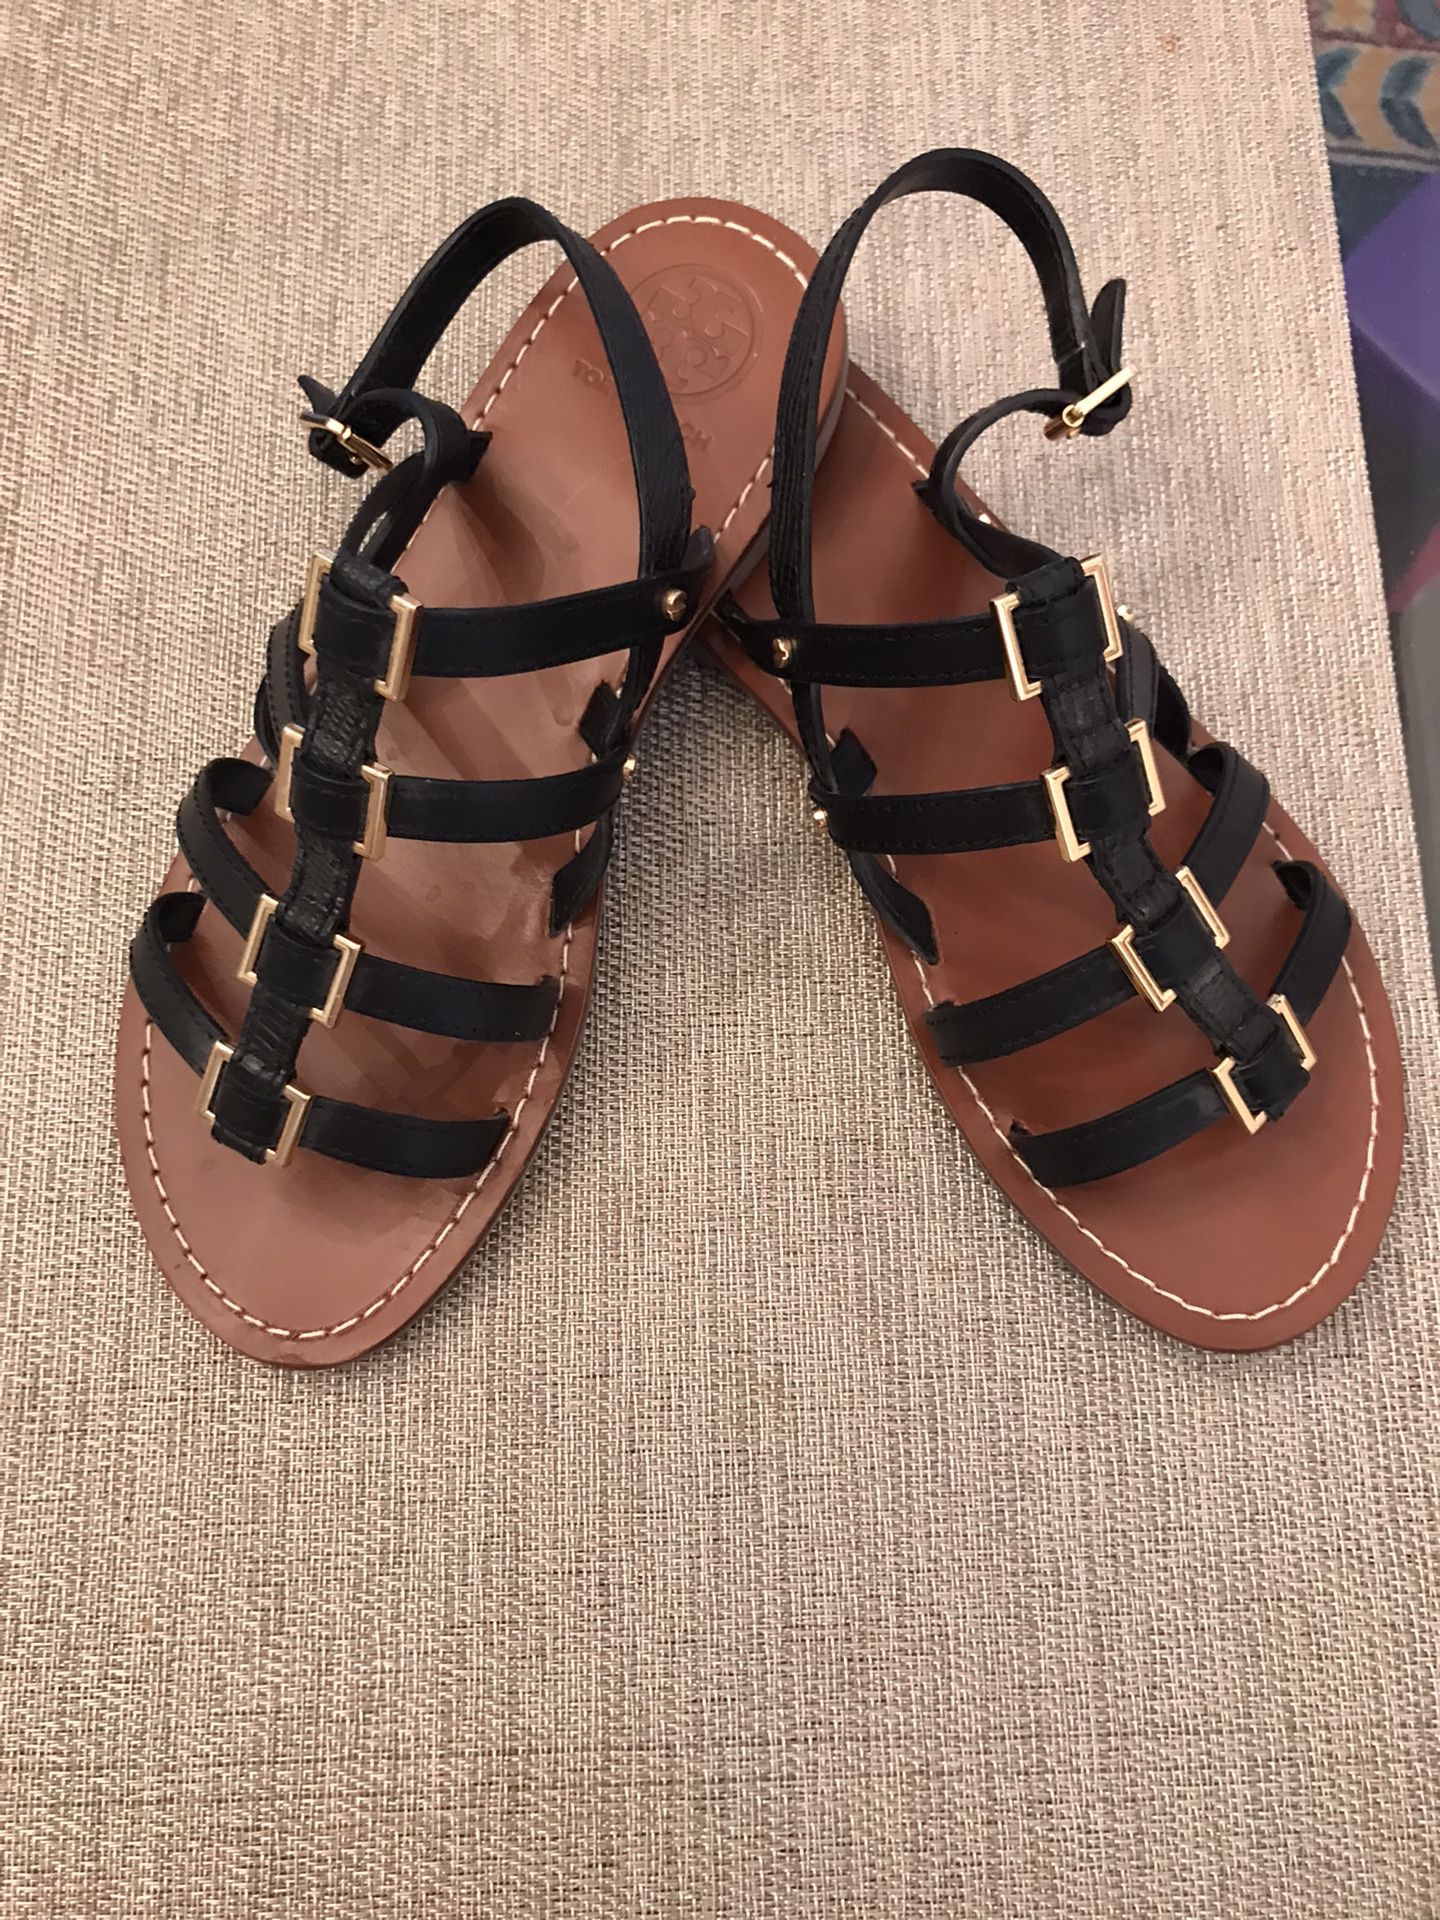 Tory Burch Gladiator Sandals for Sale in Temecula, CA - OfferUp